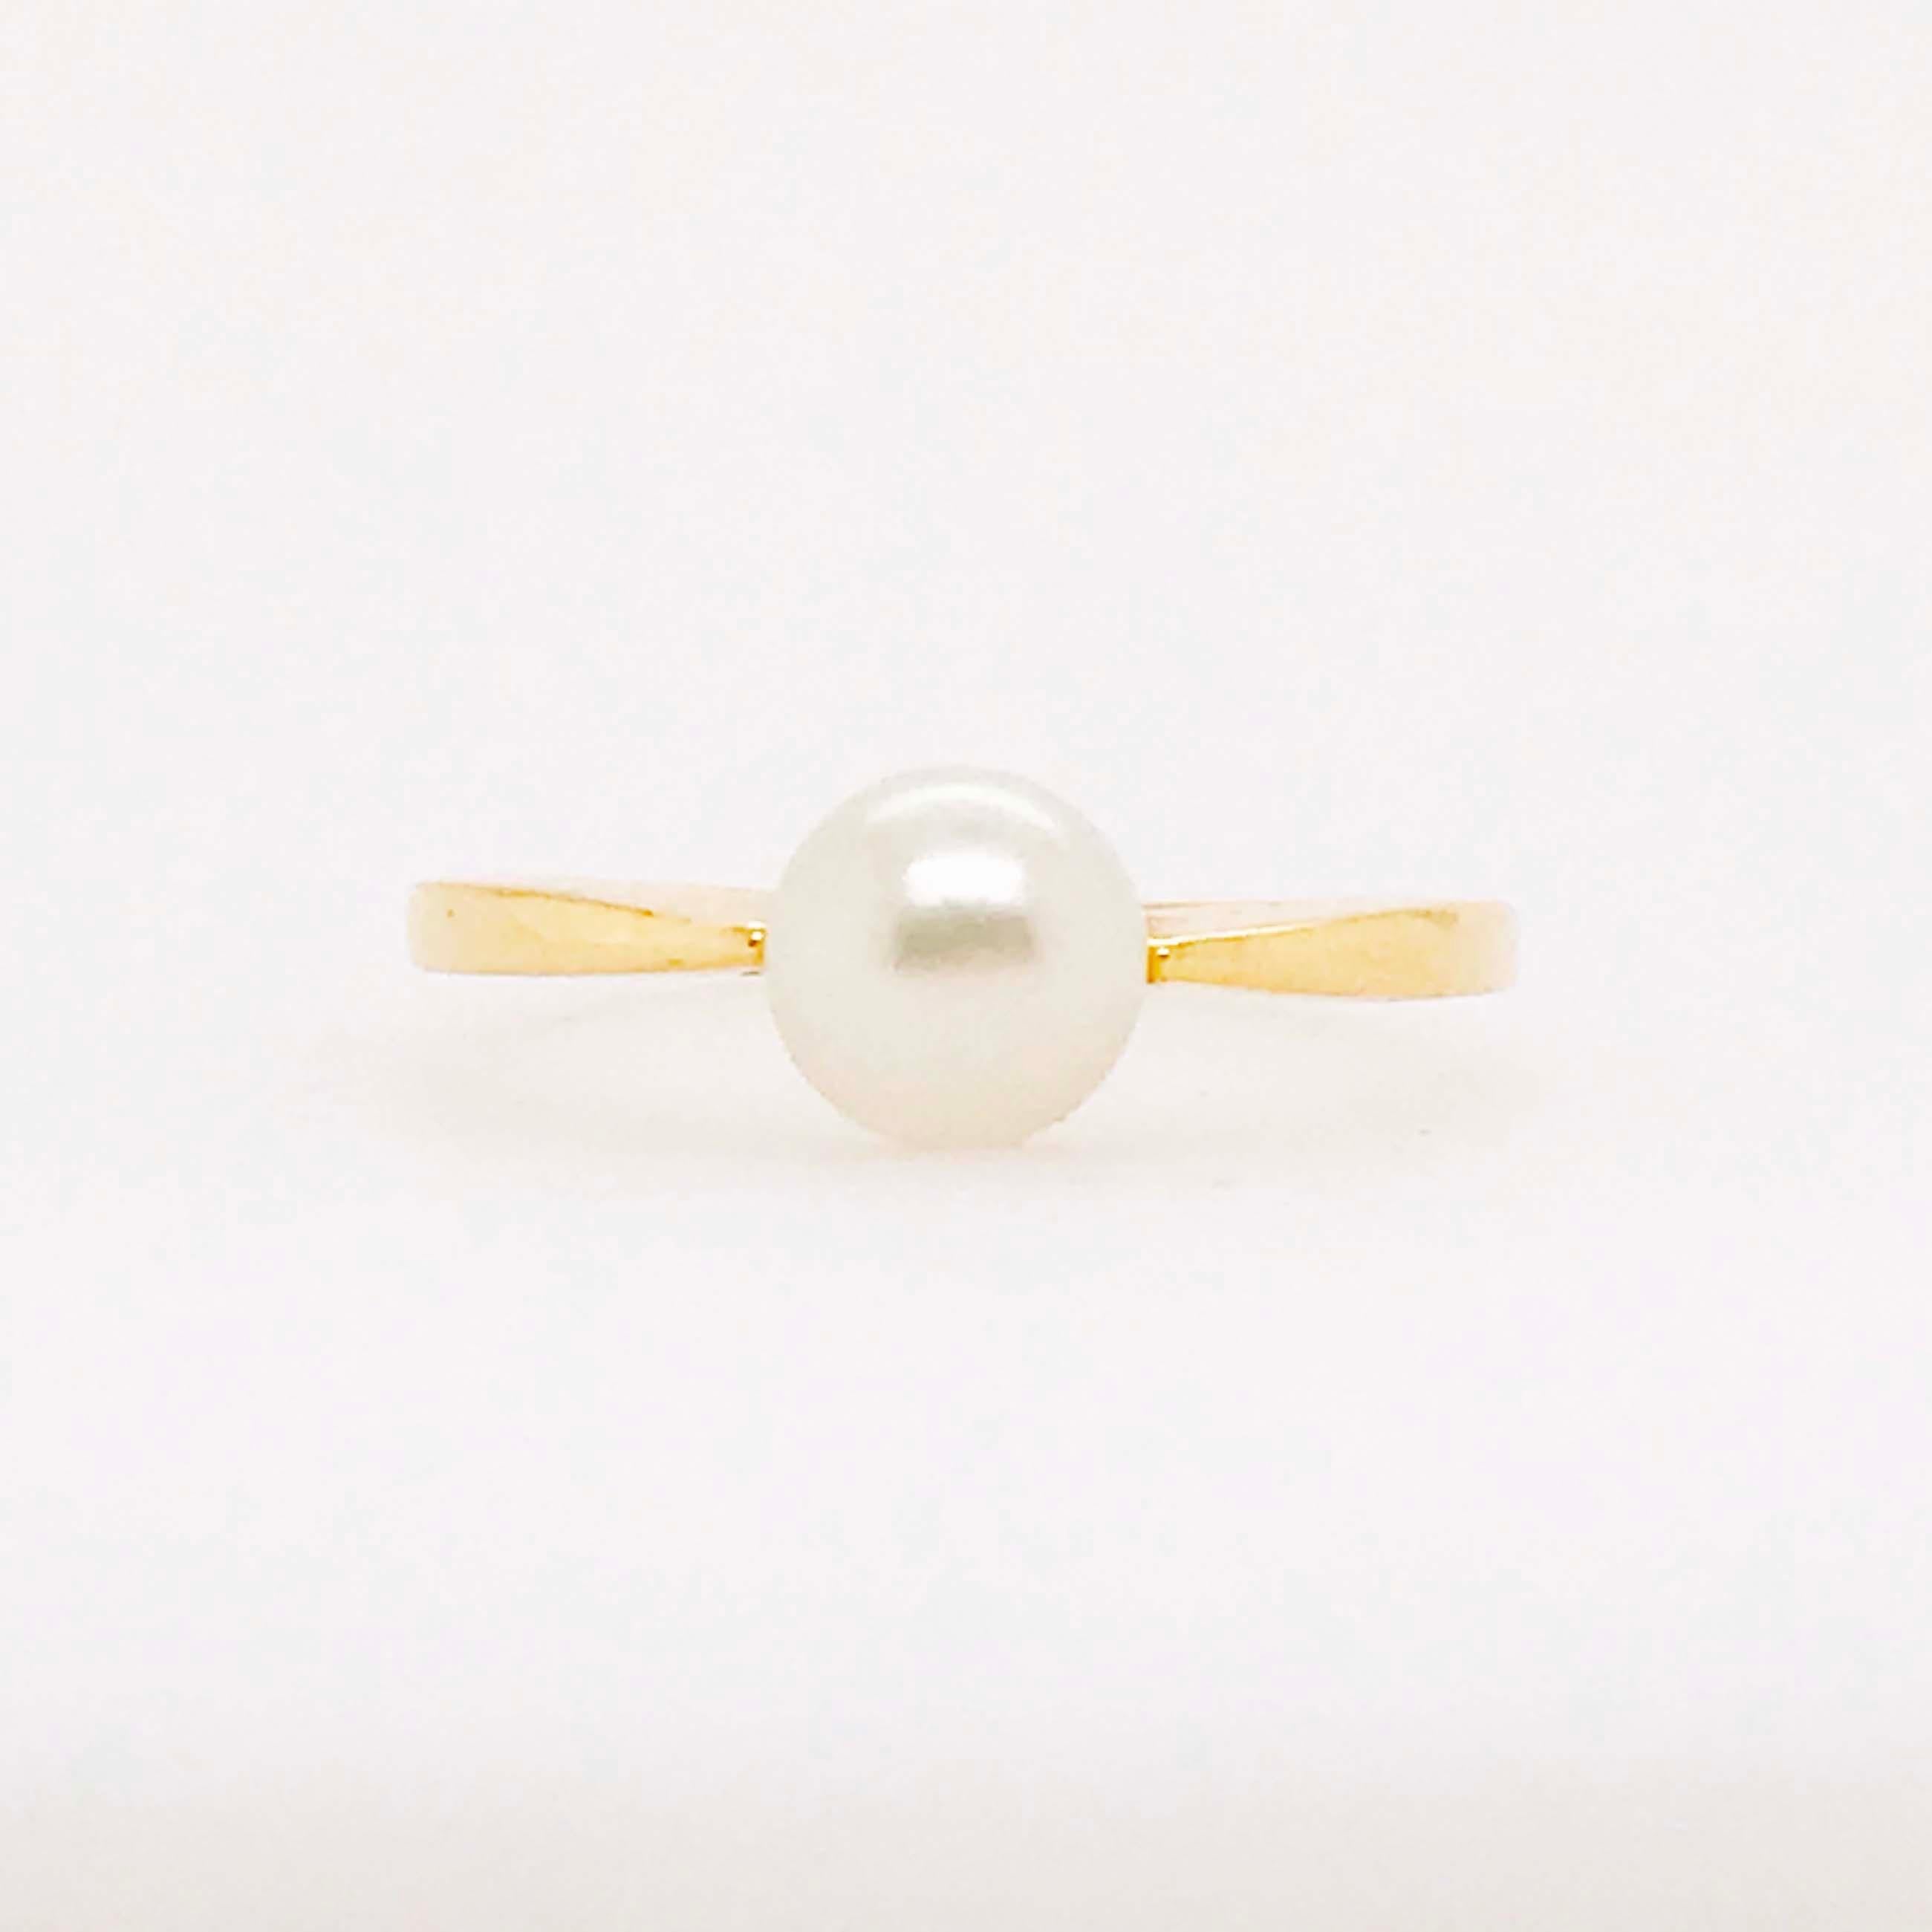 This stunning Akoya pearl ring is so adorable and fun! With a genuine round Akoya pearl mounted in the center. The pearl is excellent quality and 6mm - 6.5mm round. The color is a creamy pearl white and pairs perfectly with the 14k rich yellow gold.